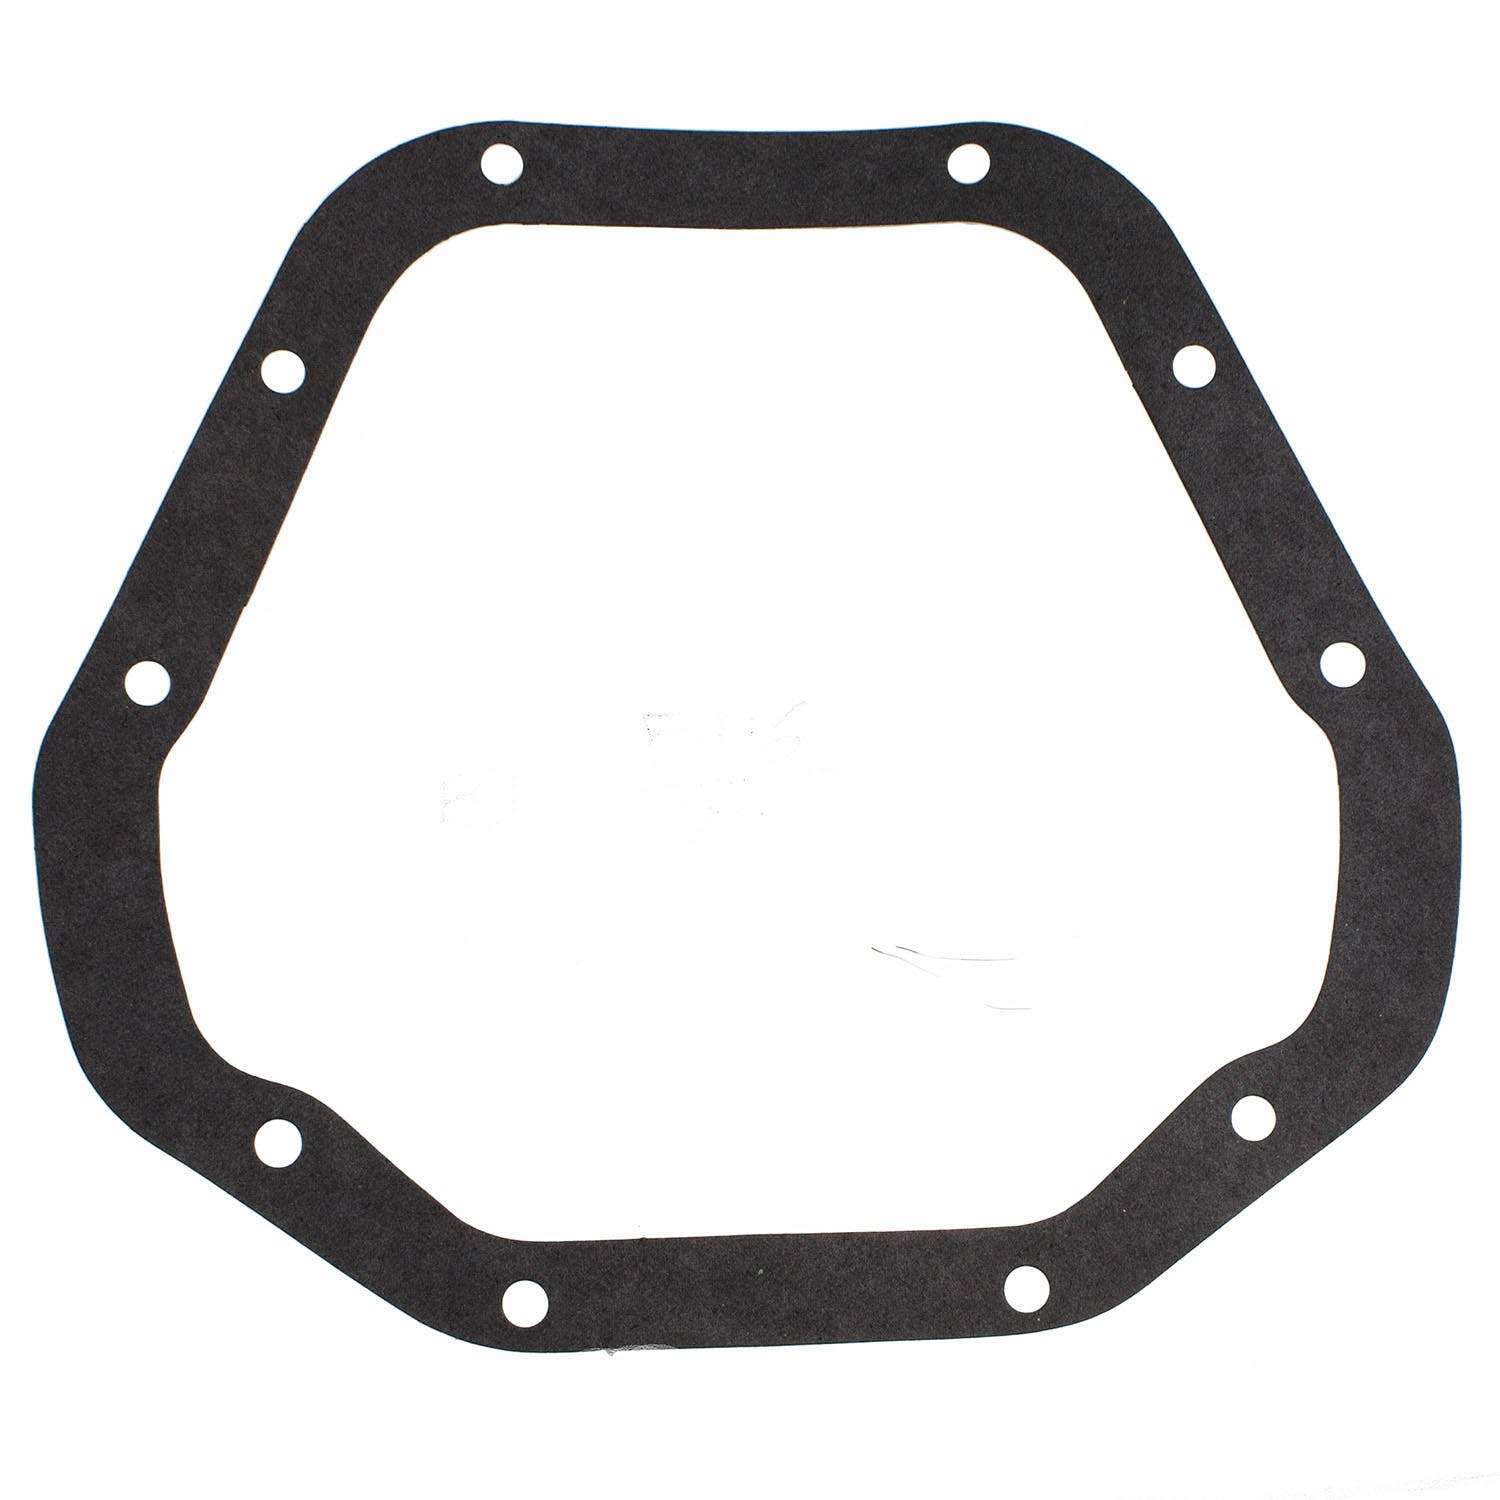 Motive Gear 5116 Differential Cover Gasket